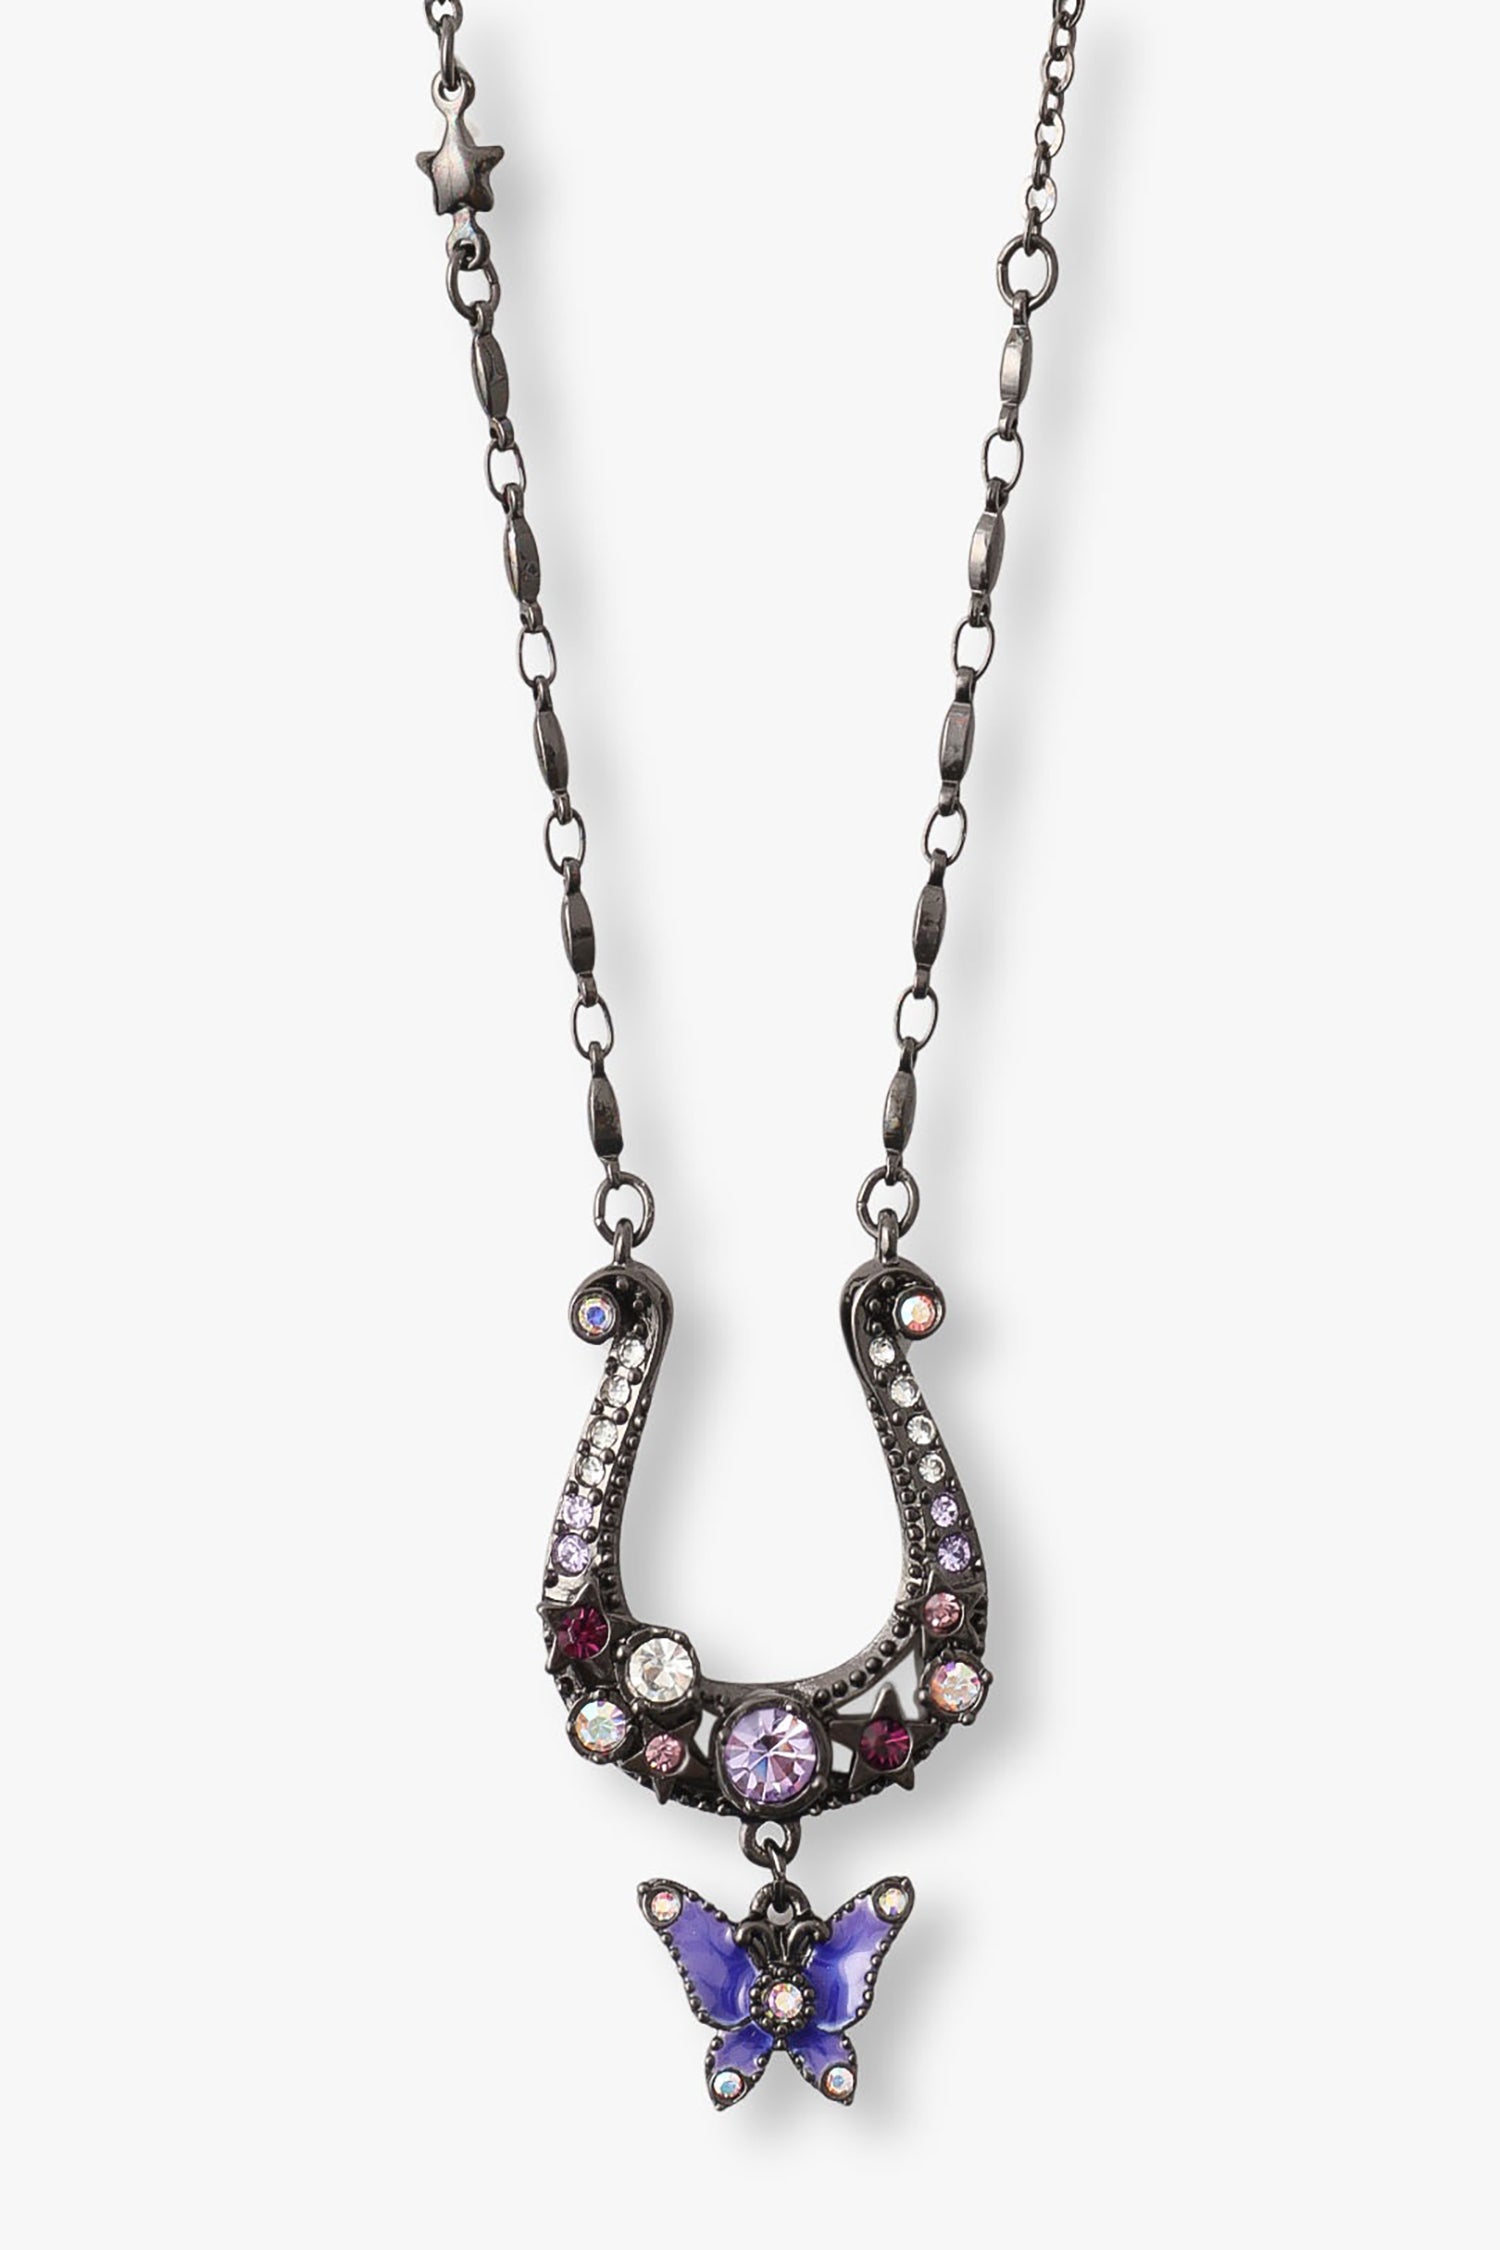 Gunmetal horseshoe with Gems and glass, and a purple butterfly pendant